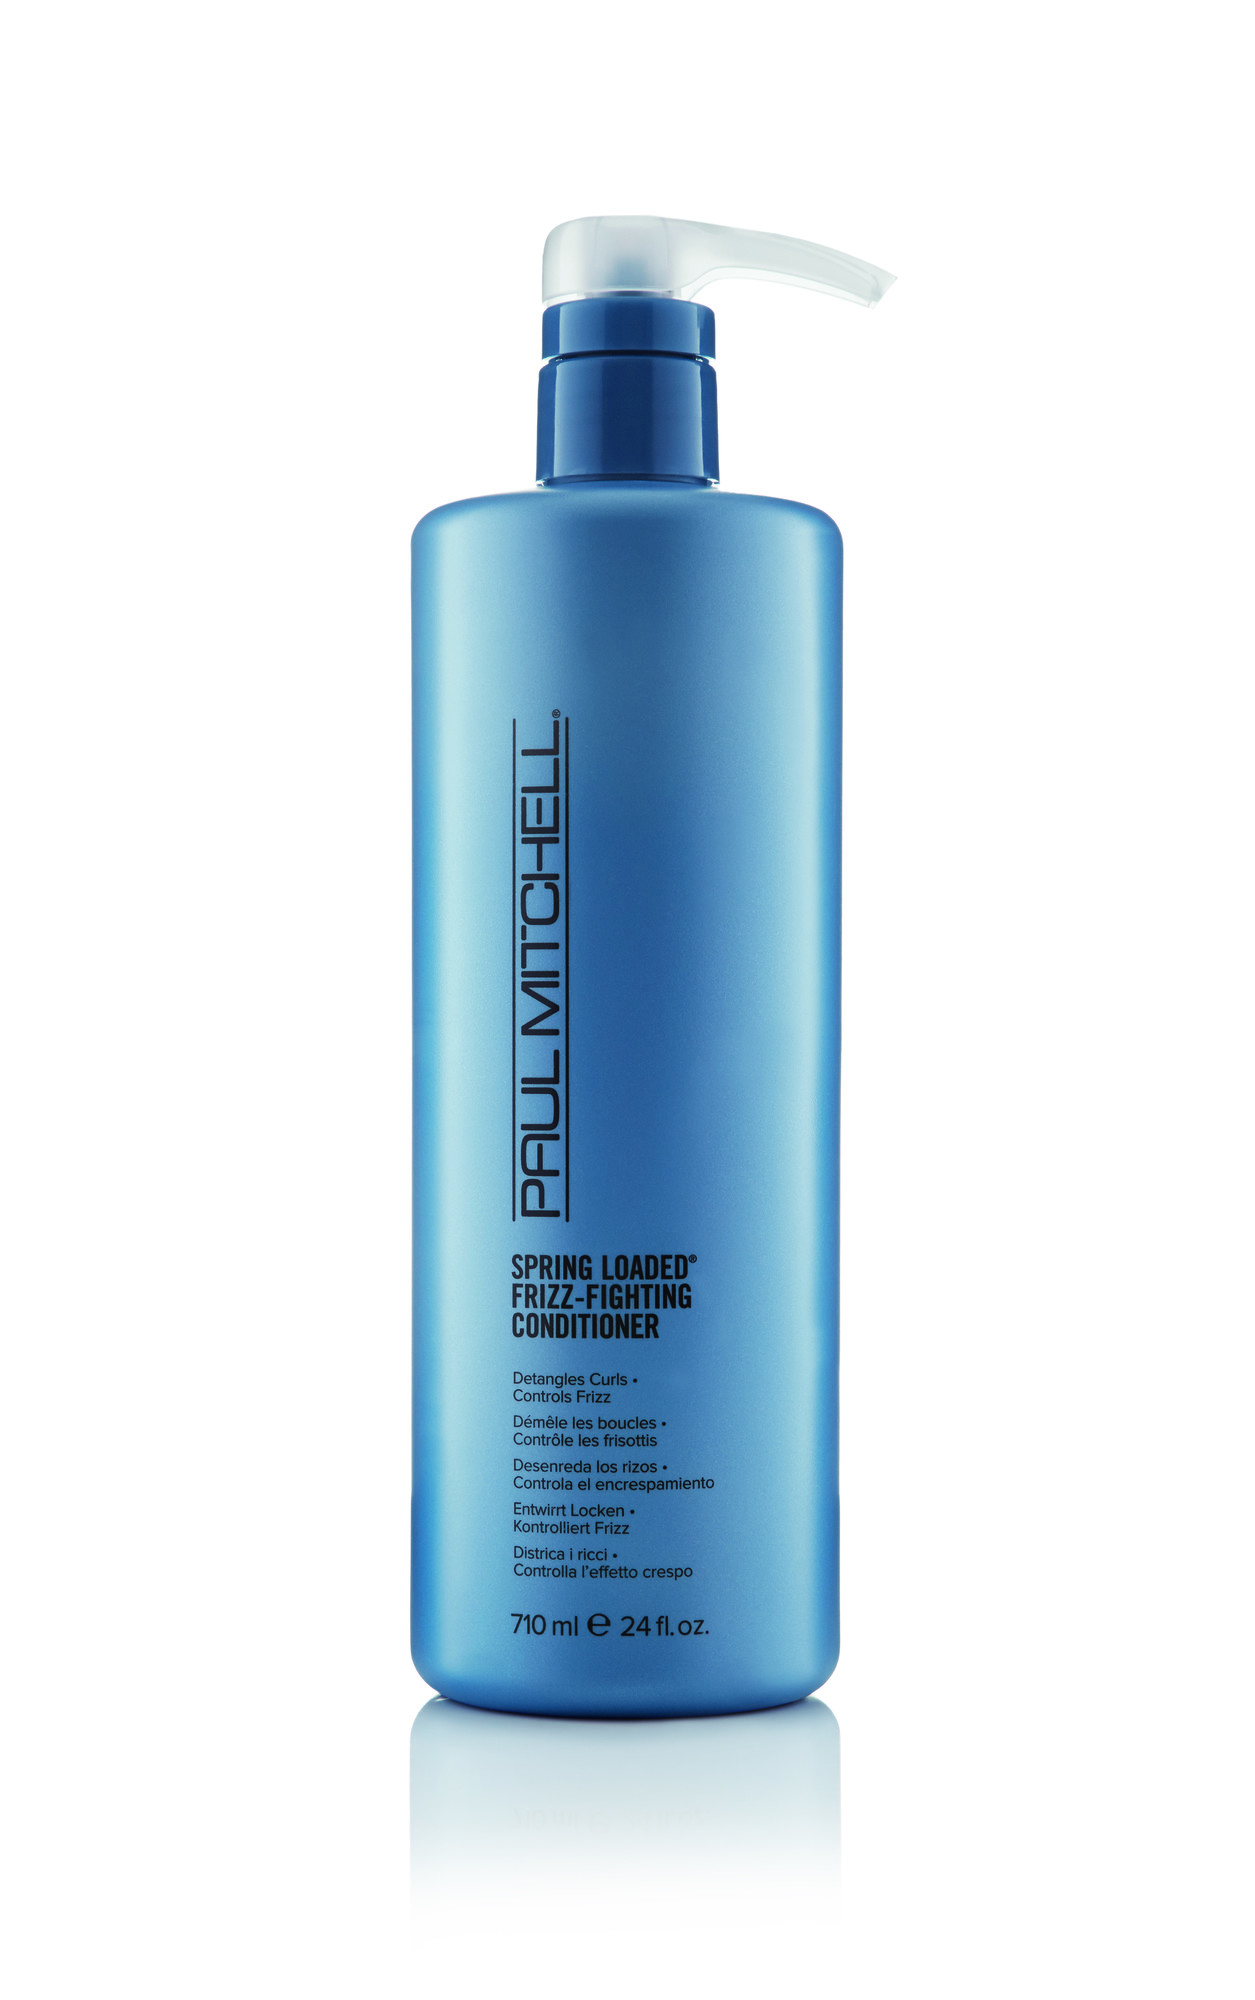 Spring Loaded® Frizz-Fighting Conditioner obsah (ml): 710ml